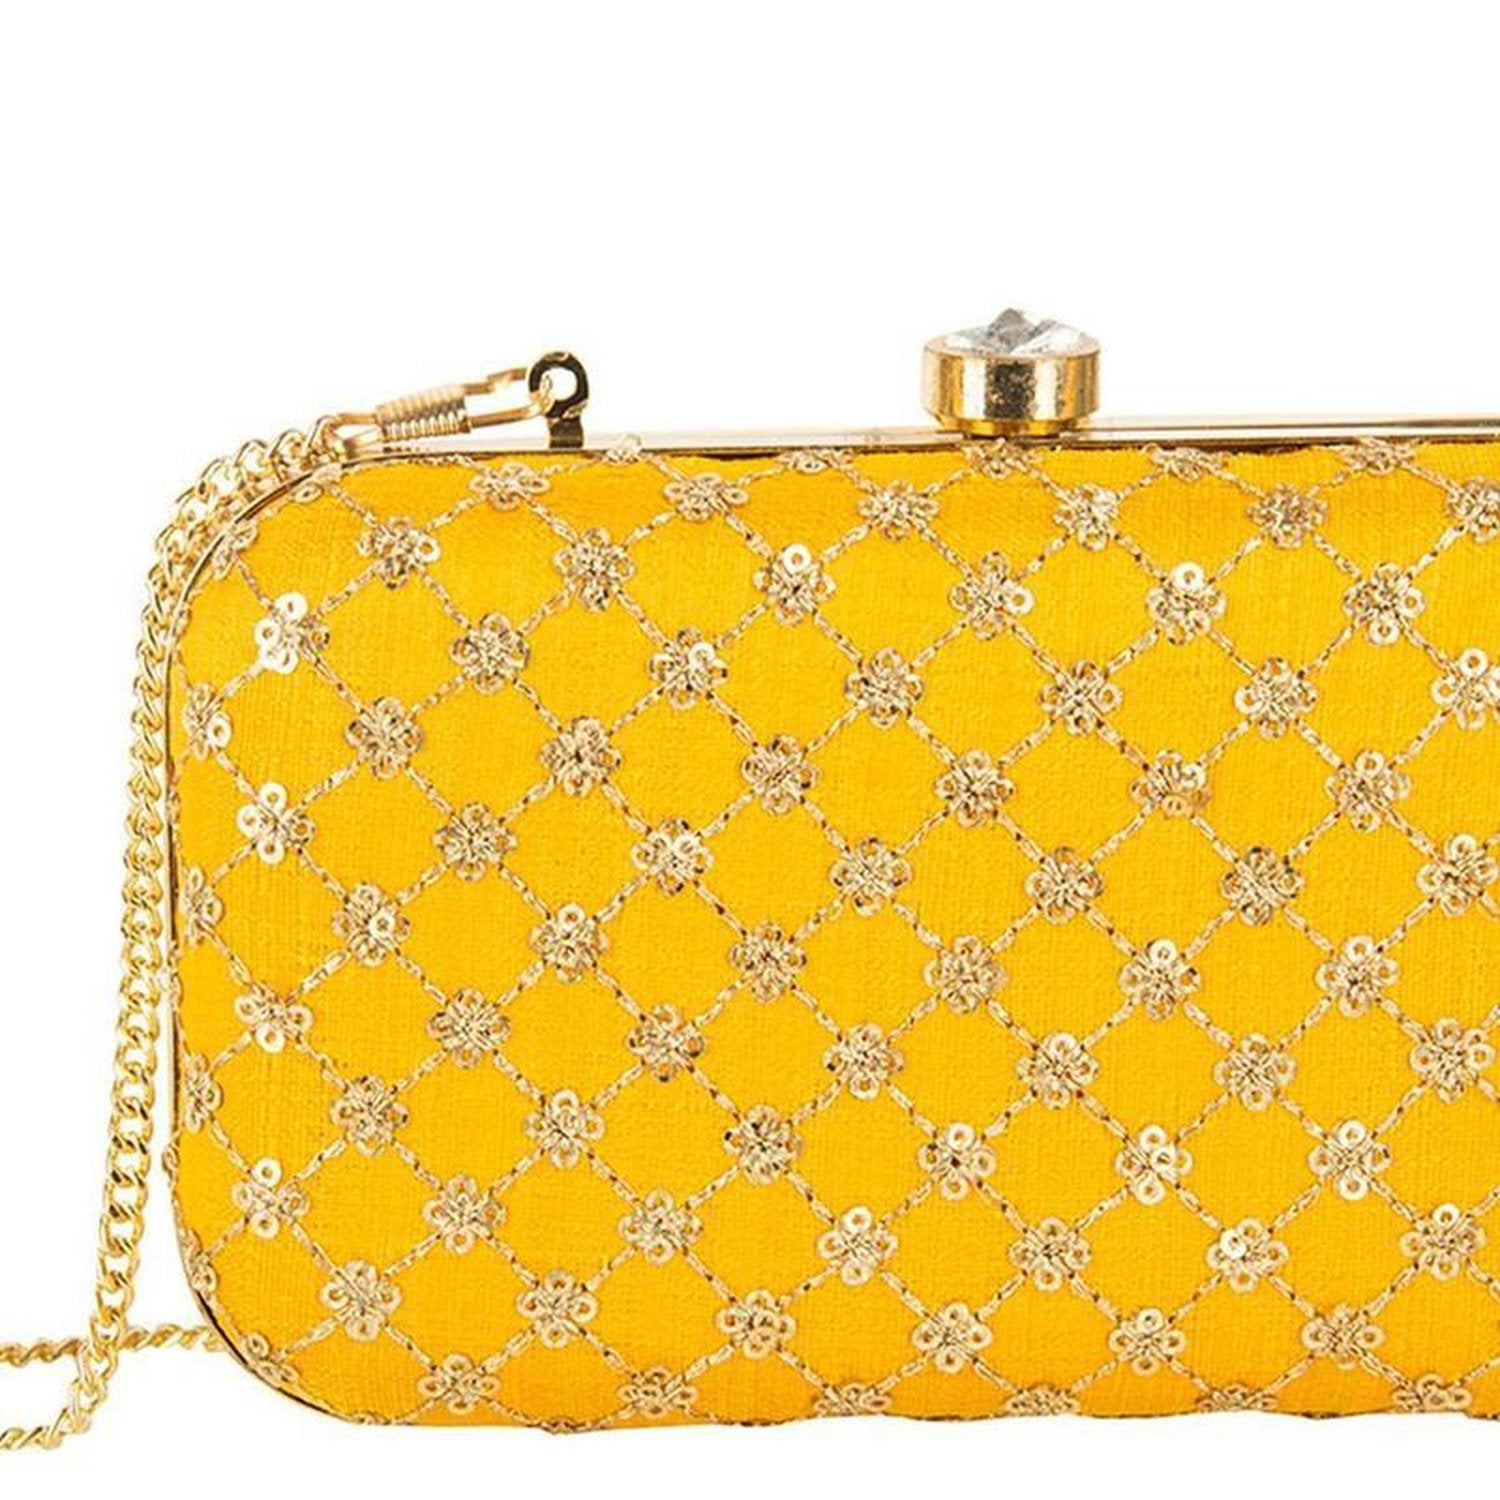 Clutch Bags for Women - Golden Clutch Bag for girls and women Purse,designs  may very, 1